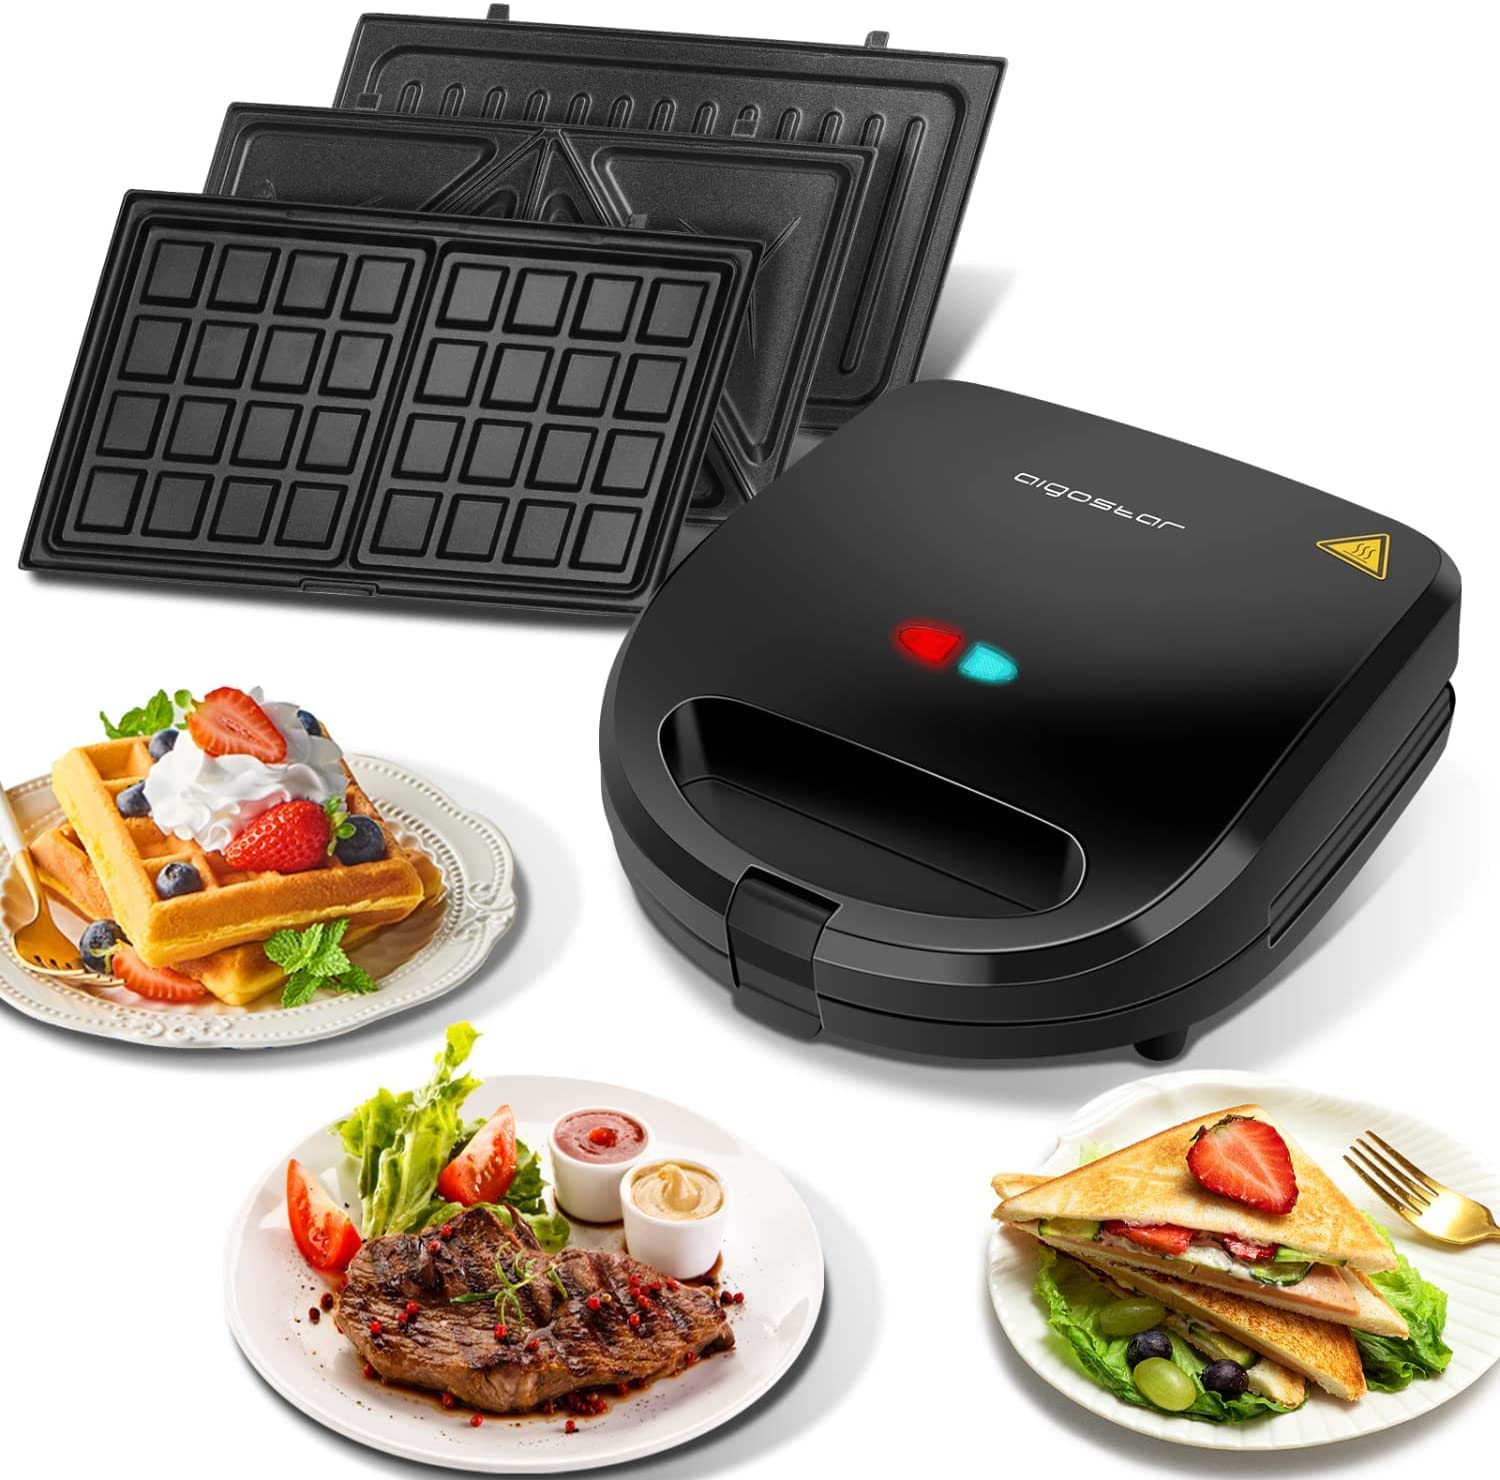 Aigostar 3-in-1 Sandwich Maker, 750 W Sandwich Toaster, 3 Removable Grill Plates, Contact Grill, Waffle Iron, 3-in-1, Dishwasher Safe, Triangular Sandwich Maker, Non-Stick, Black